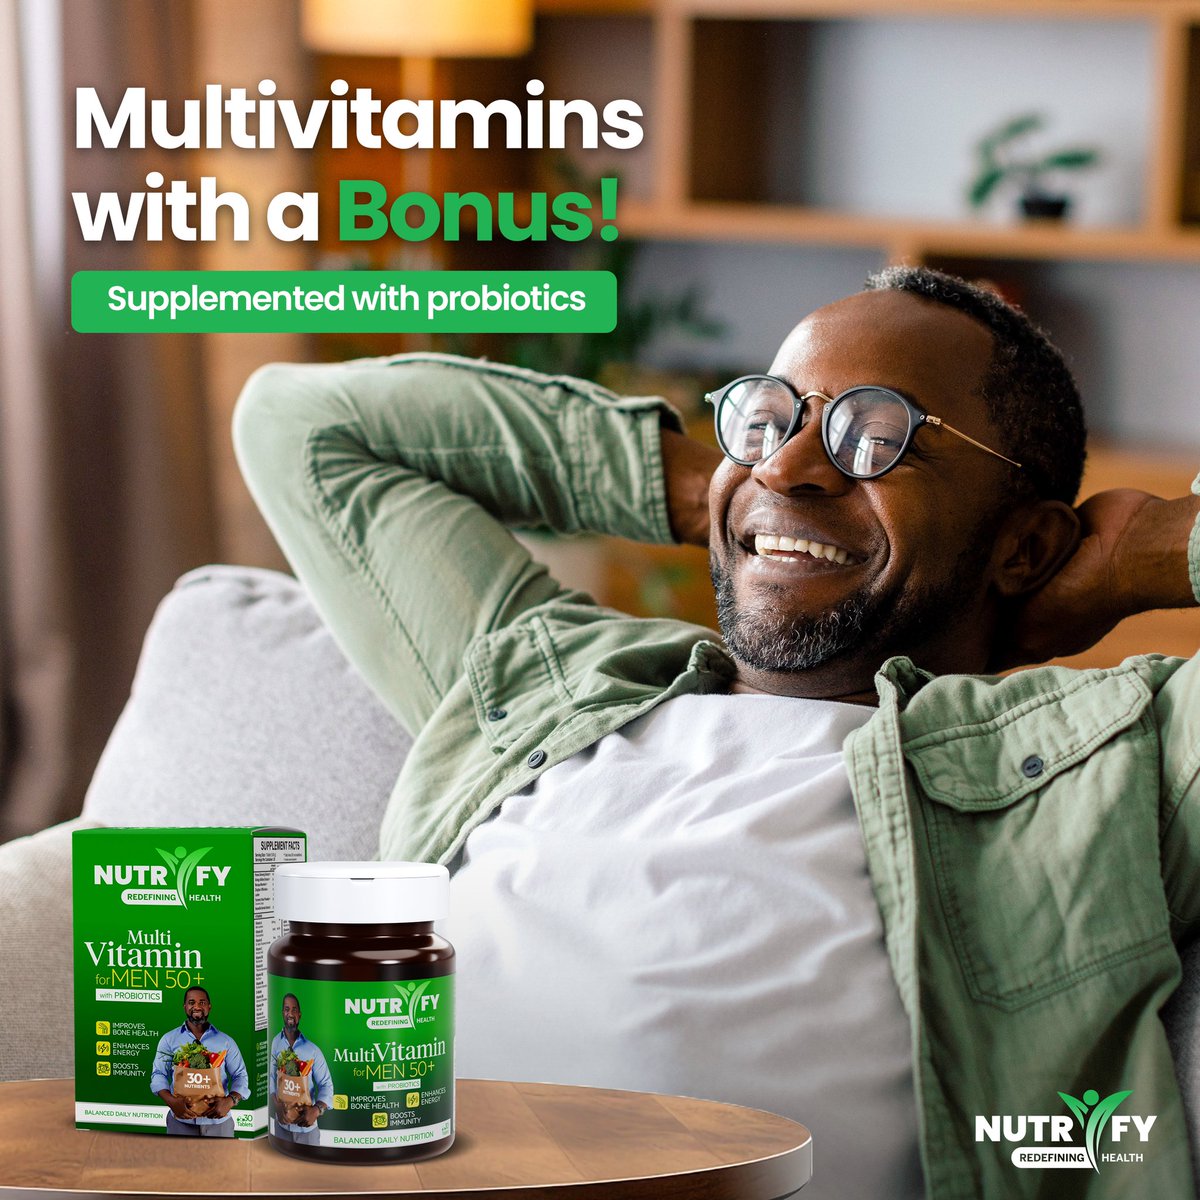 Age is just a number, especially when you've got Nutrify on your side! 🚀 Stay ahead of the game with our Multivitamin for Men 50+, now infused with the power of Probiotics—all in one handy bottle. 💪 Embrace the Nu You at any age! #TheNuYou #Multivitamins #50Plus #MV50Plus